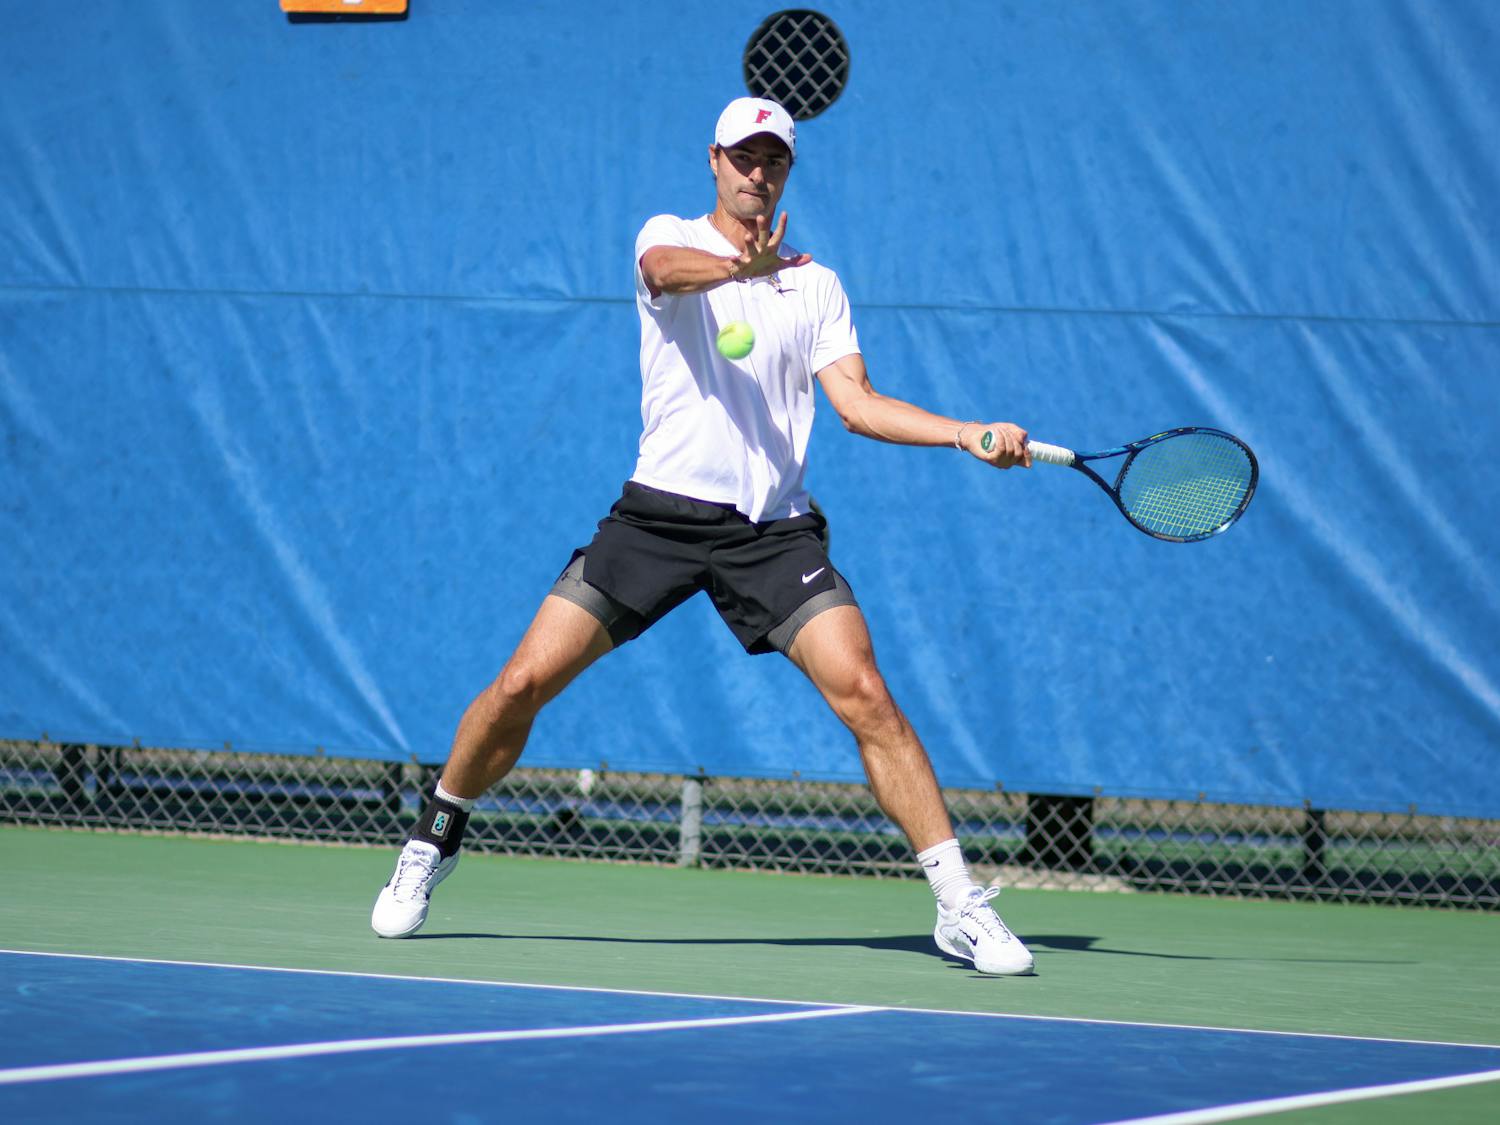 Florida graduate student Axel Nefve hits the ball in the Gators' 5-2 loss to the No. 8 Texas Longhorns Sunday, Jan. 15, 2023.